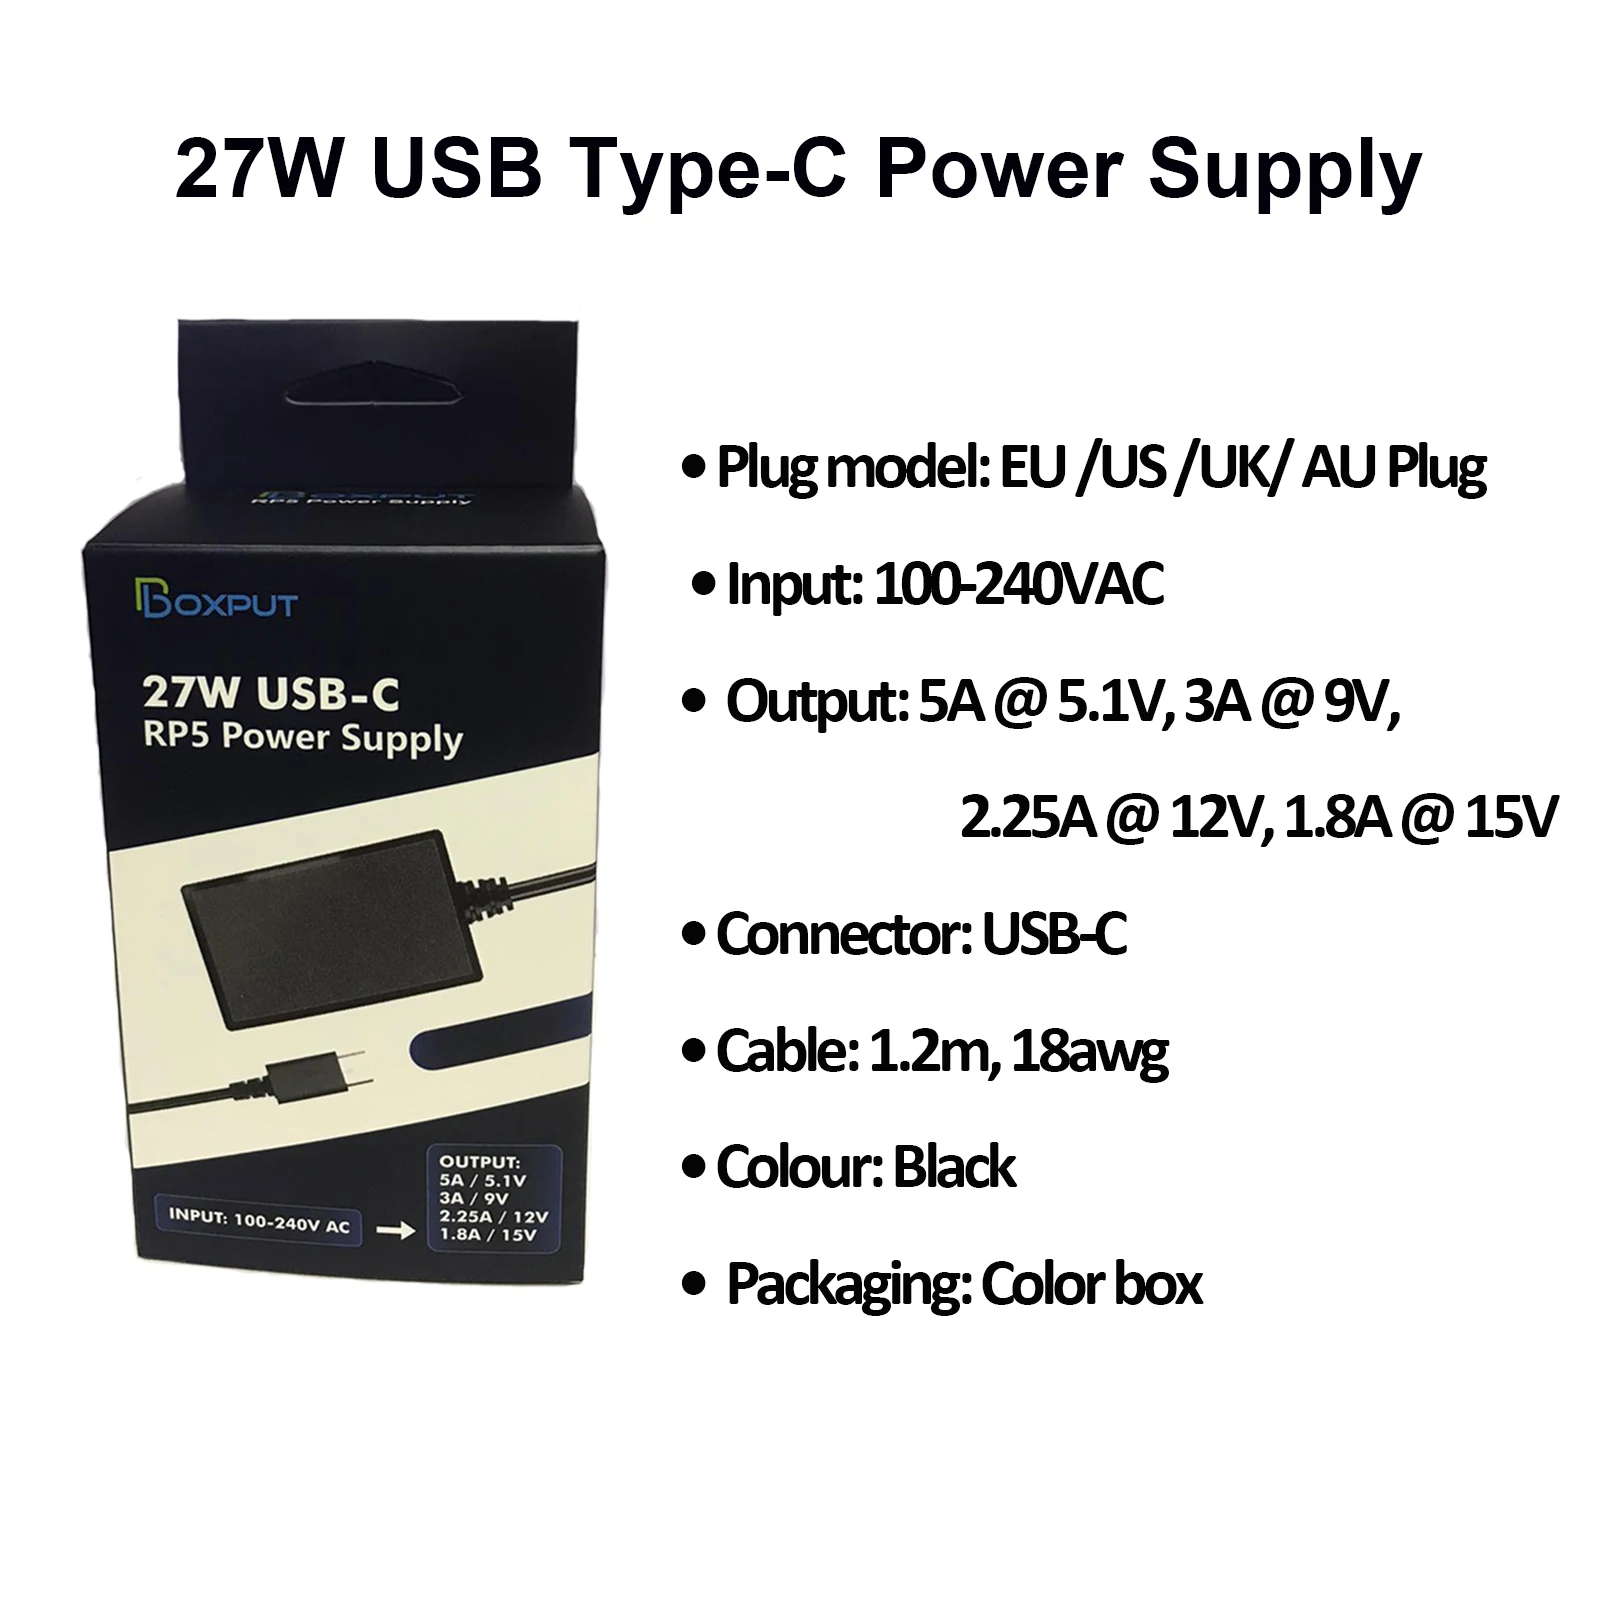 Power Supply for Raspberry Pi 5 27W USB-CPower Adapter Type C 1.2m PD  Charging EU US UK Plug Charger for Raspberry Pi 5